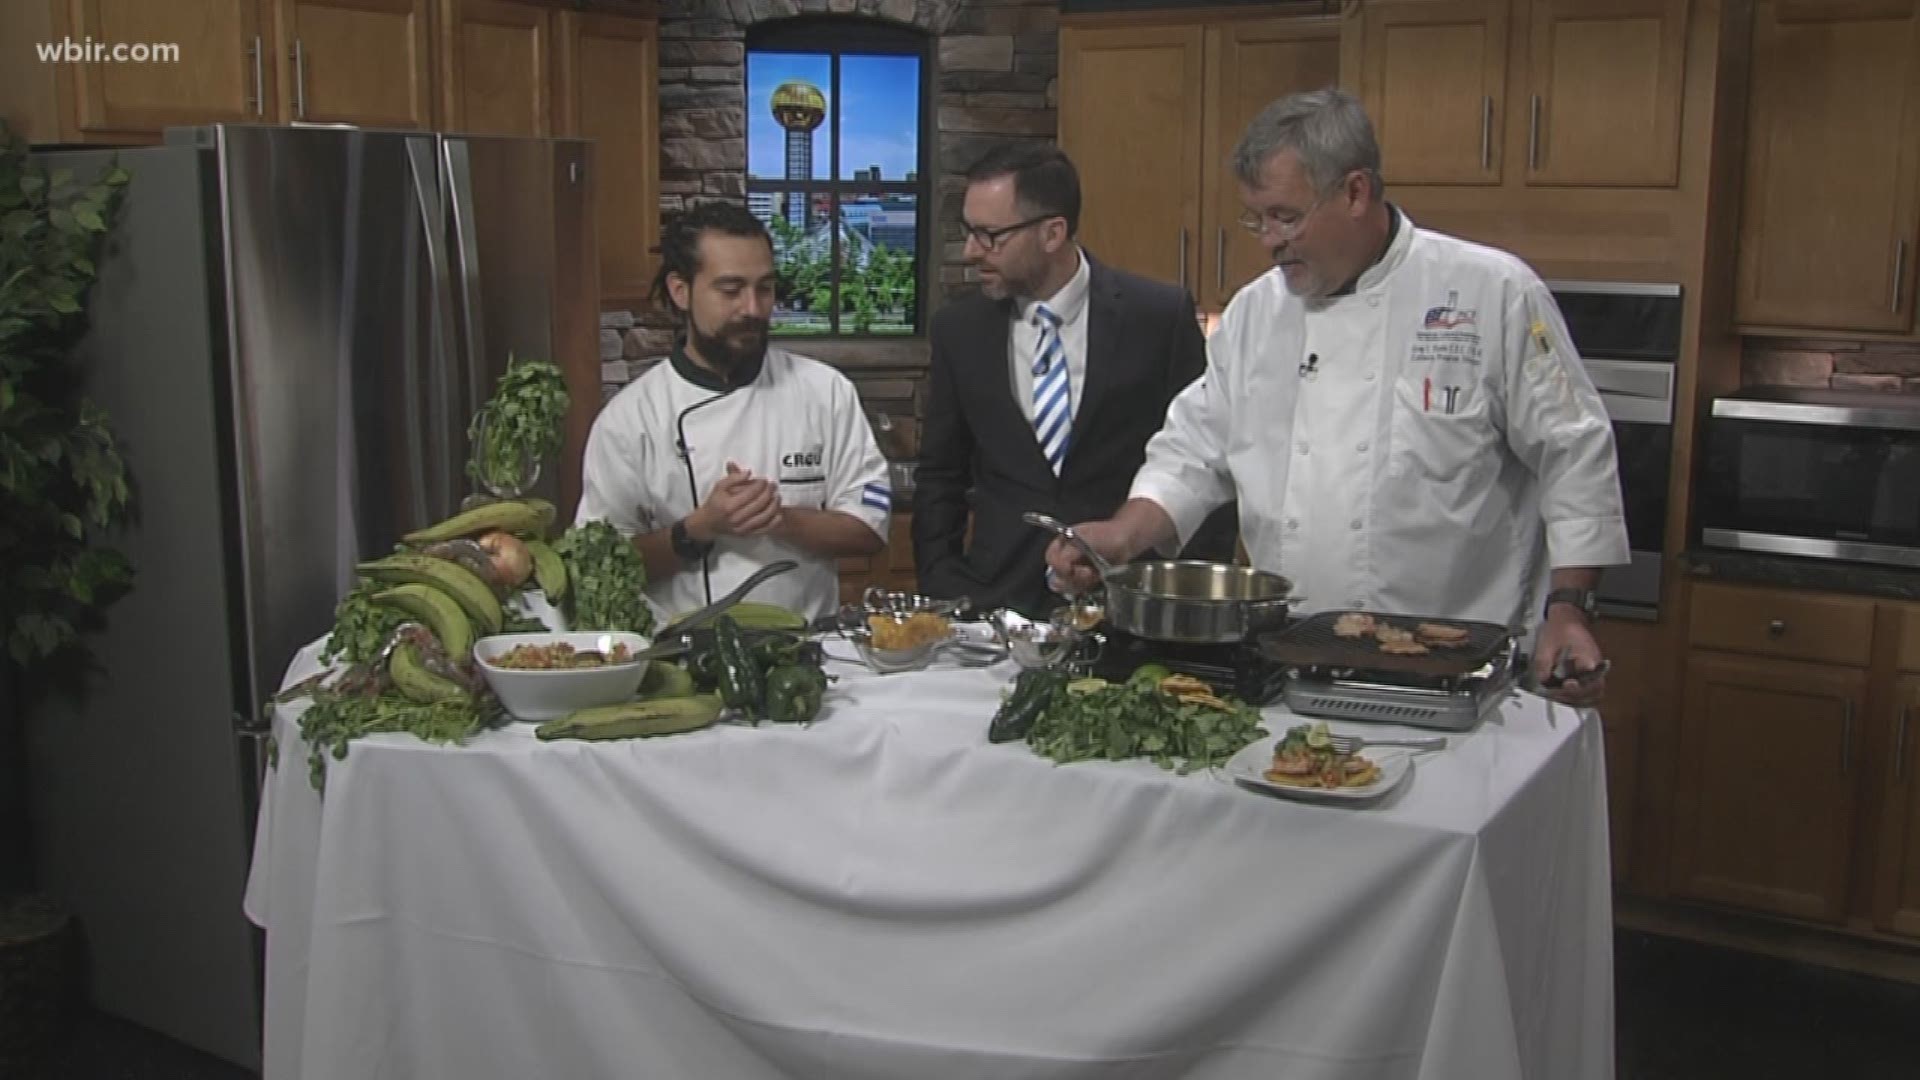 University of Tennessee's Culinary and Catering program shares how to make deep fried plantains and shrimp.